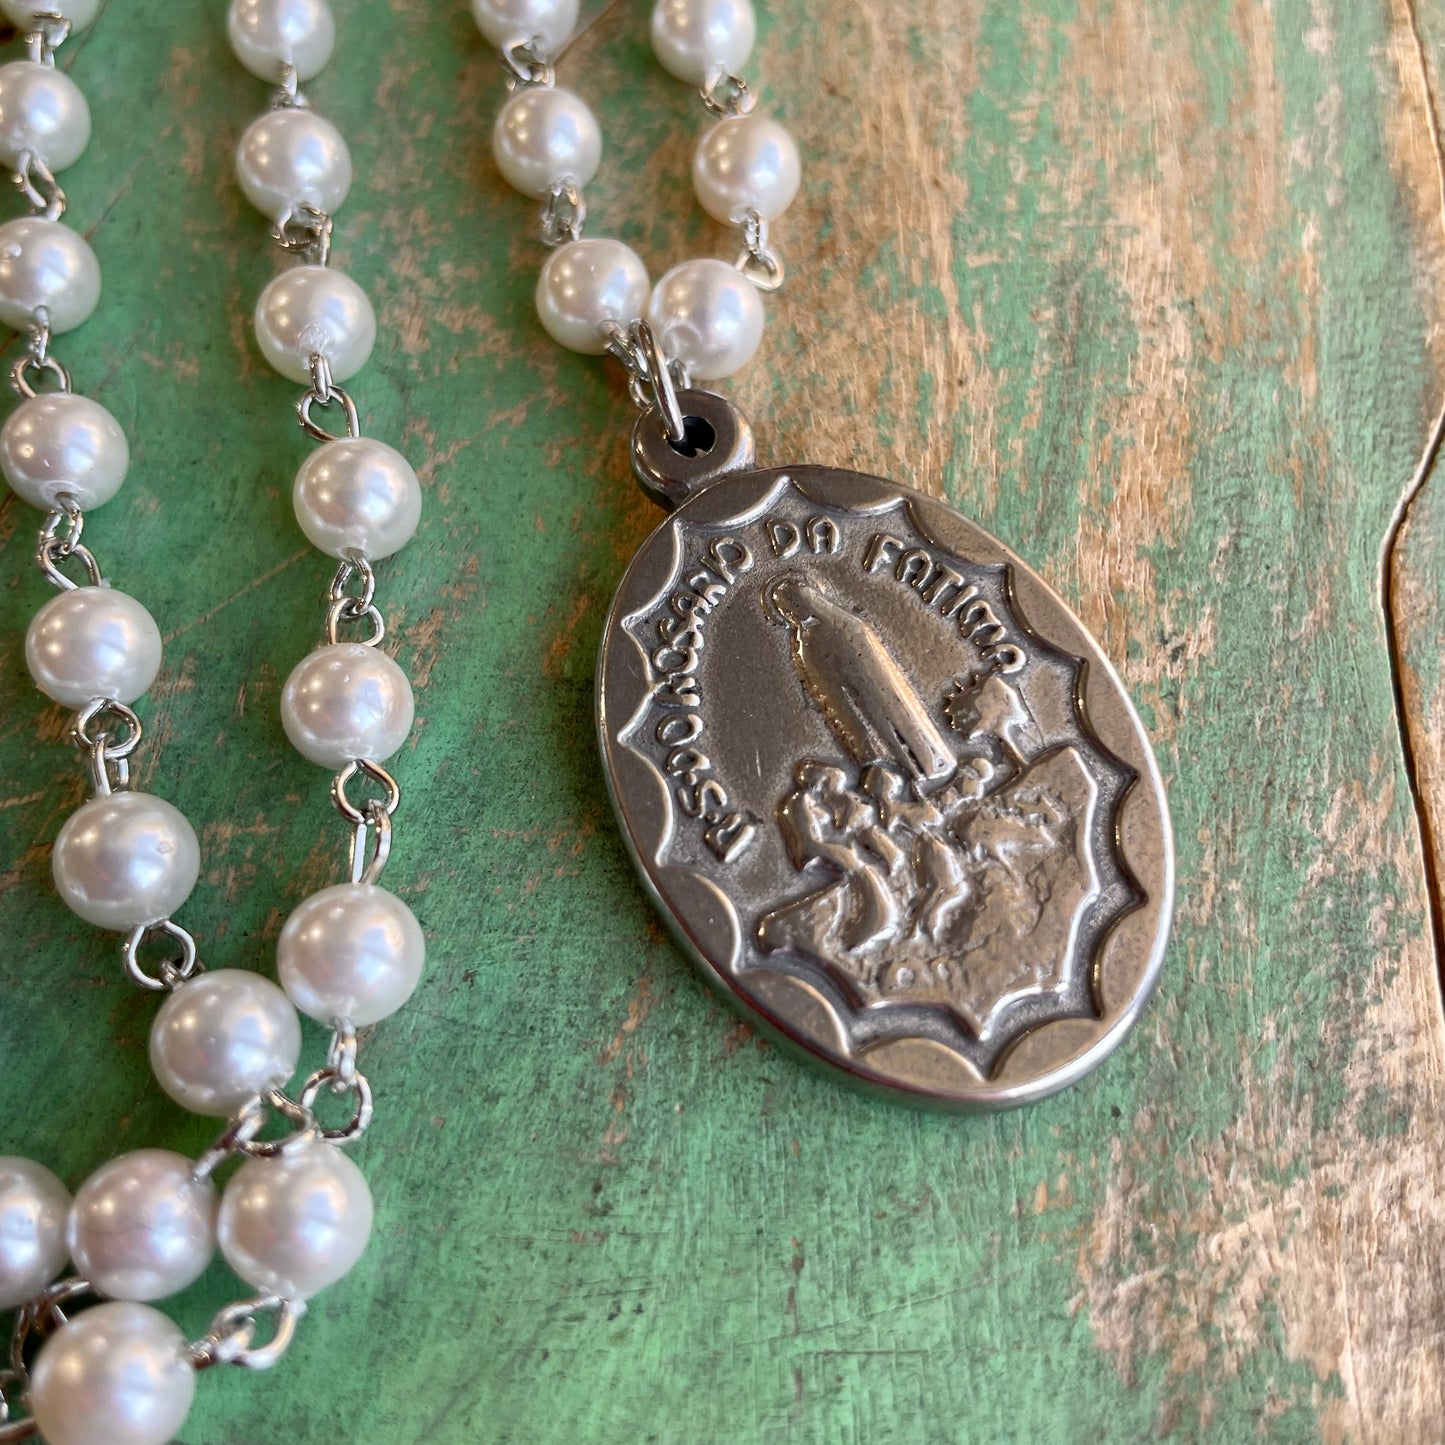 Our Lady of Fatima Pearl Necklace